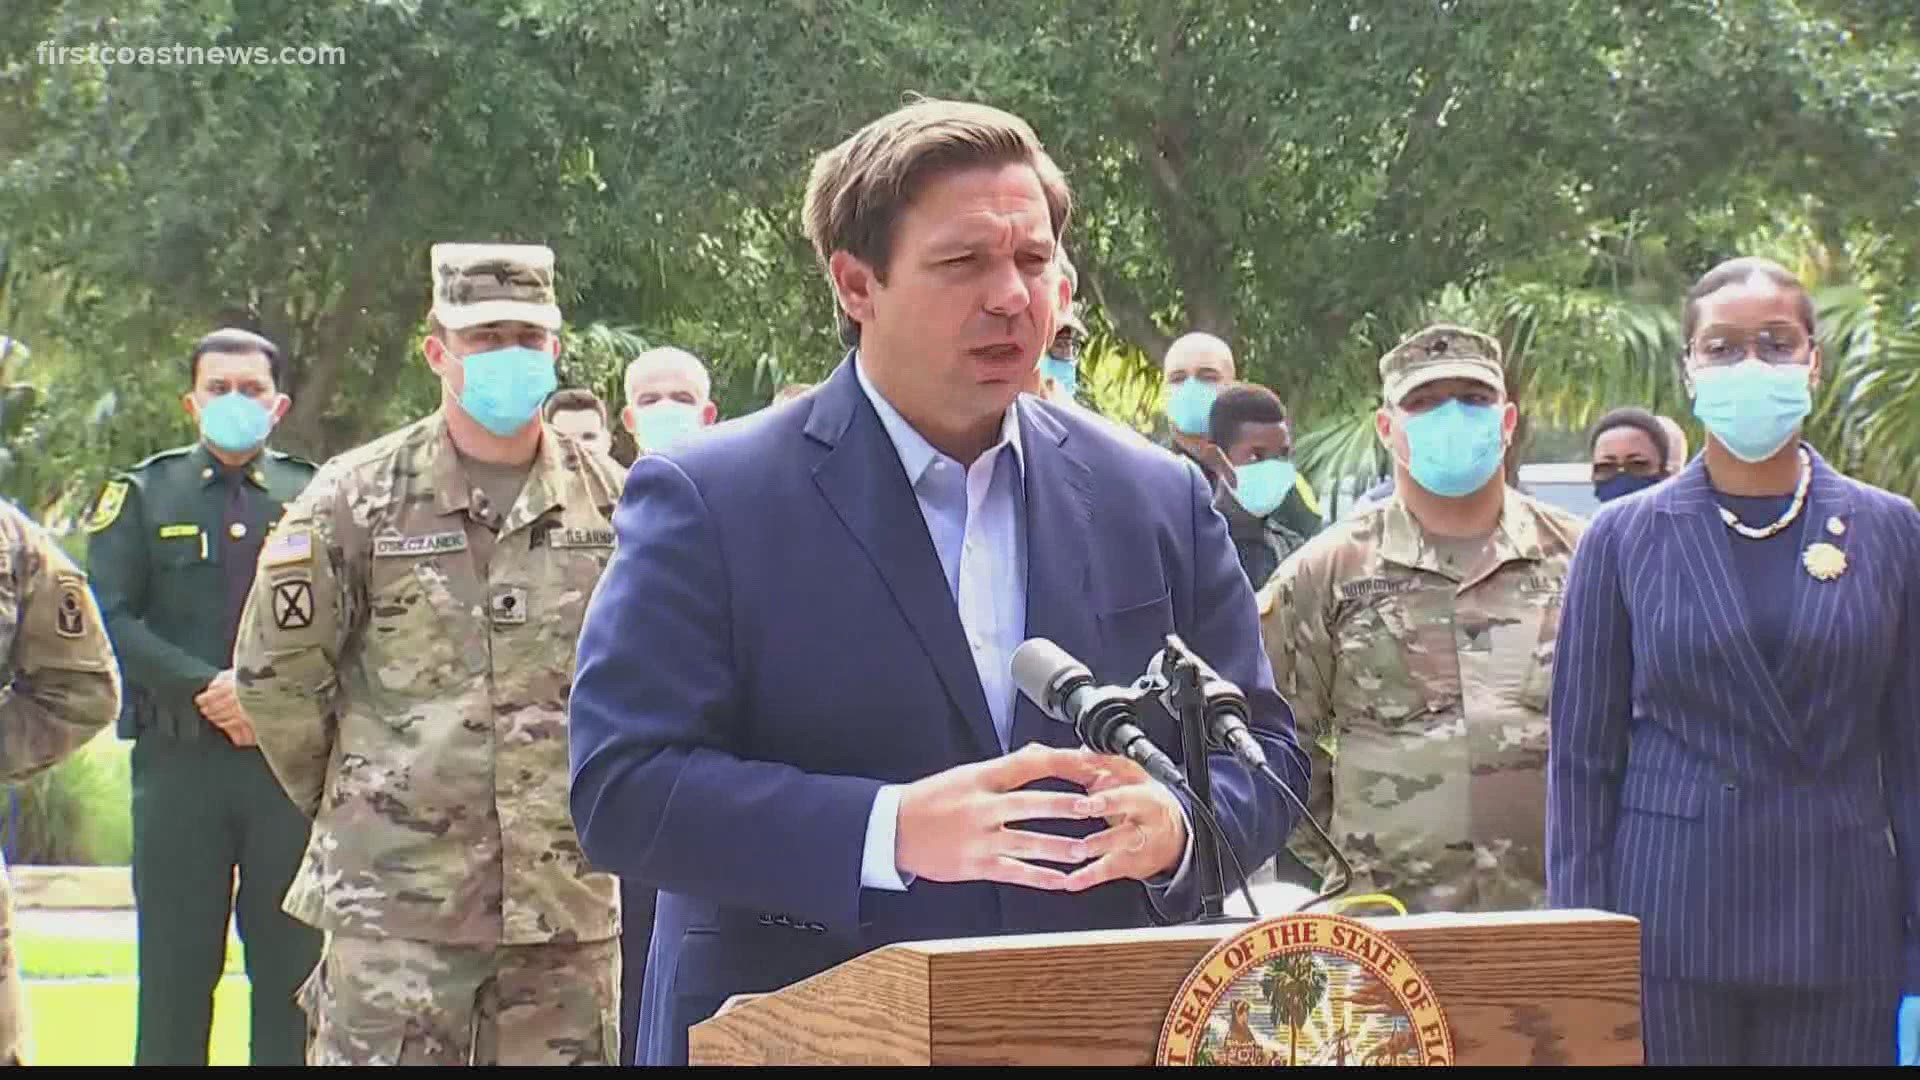 Friday, Florida Governor Ron DeSantis held a press conference in Fort Lauderdale less than 24-hours after President Trump released a three-phase outline for recovery